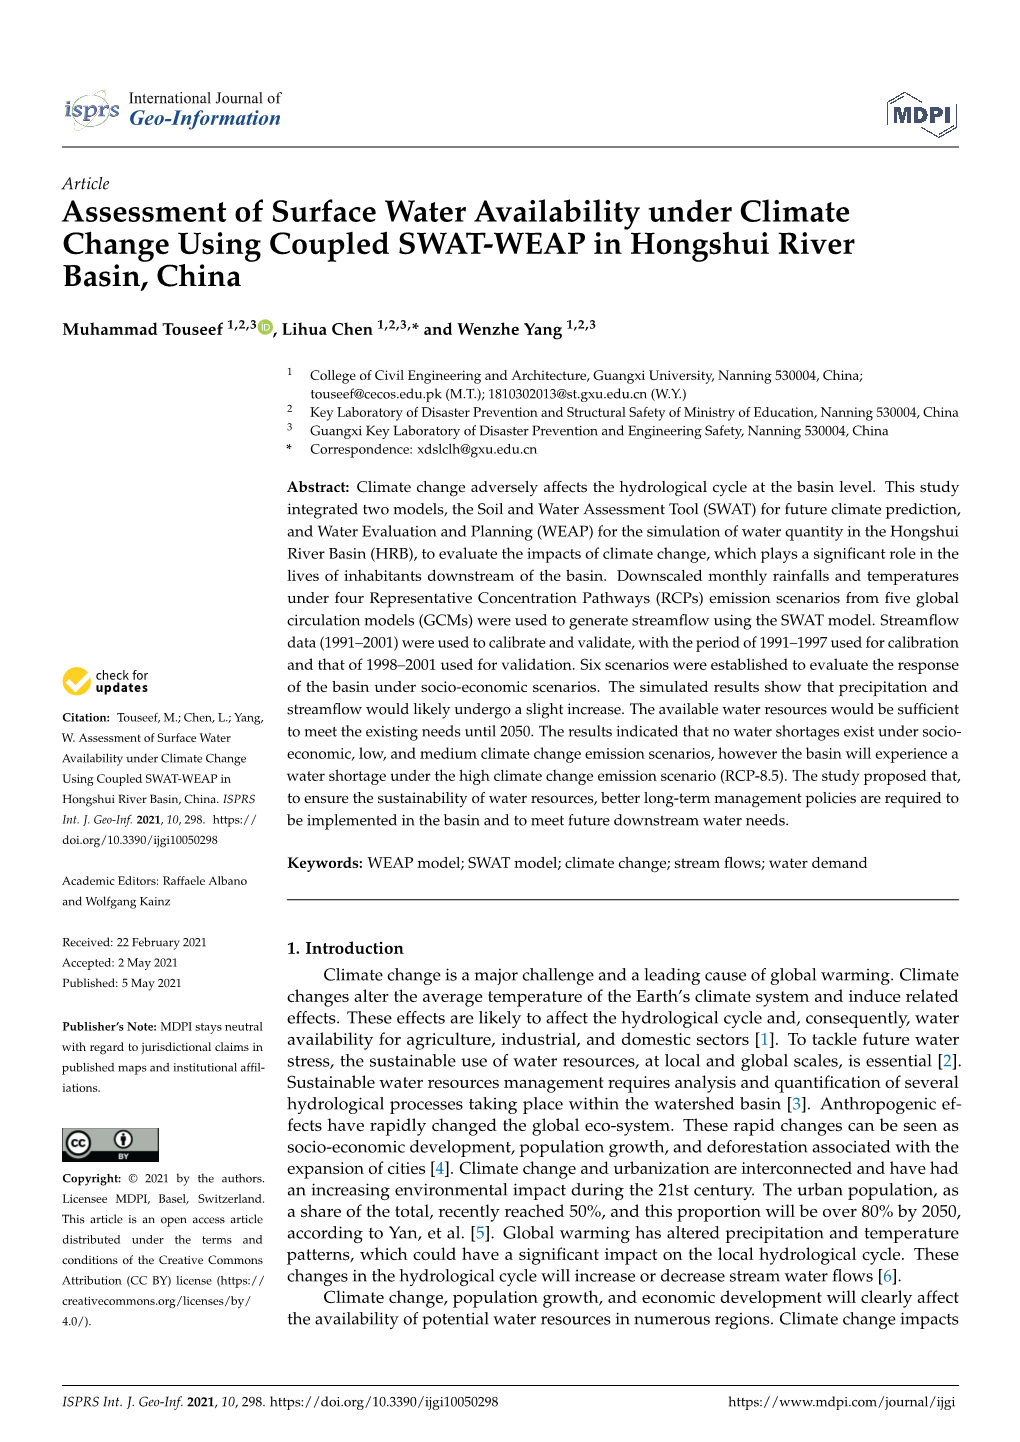 Assessment of Surface Water Availability Under Climate Change Using Coupled SWAT-WEAP in Hongshui River Basin, China